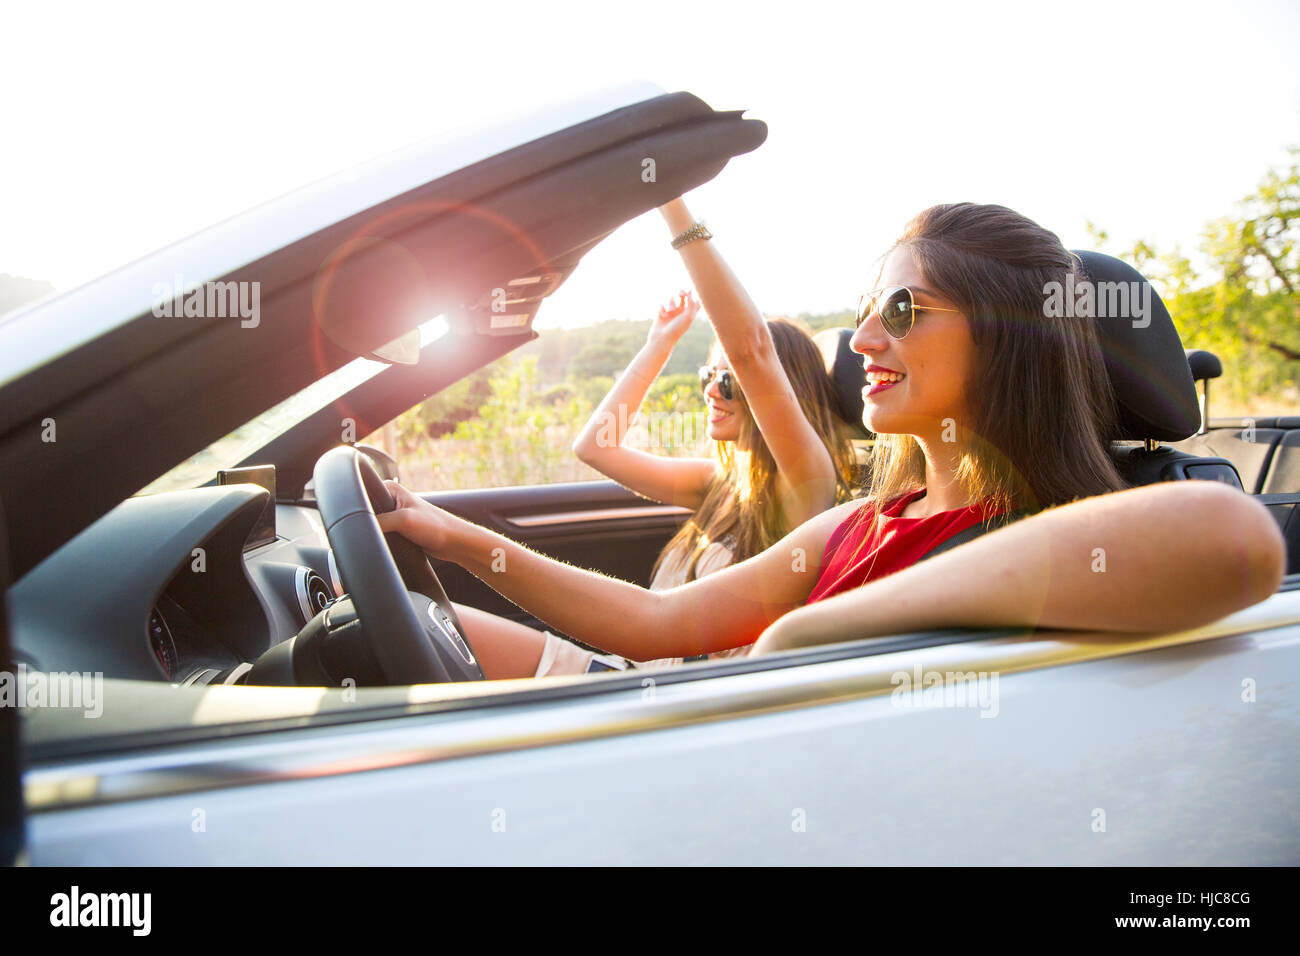 Two young women driving on rural road in convertible, Majorca, Spain Stock Photo